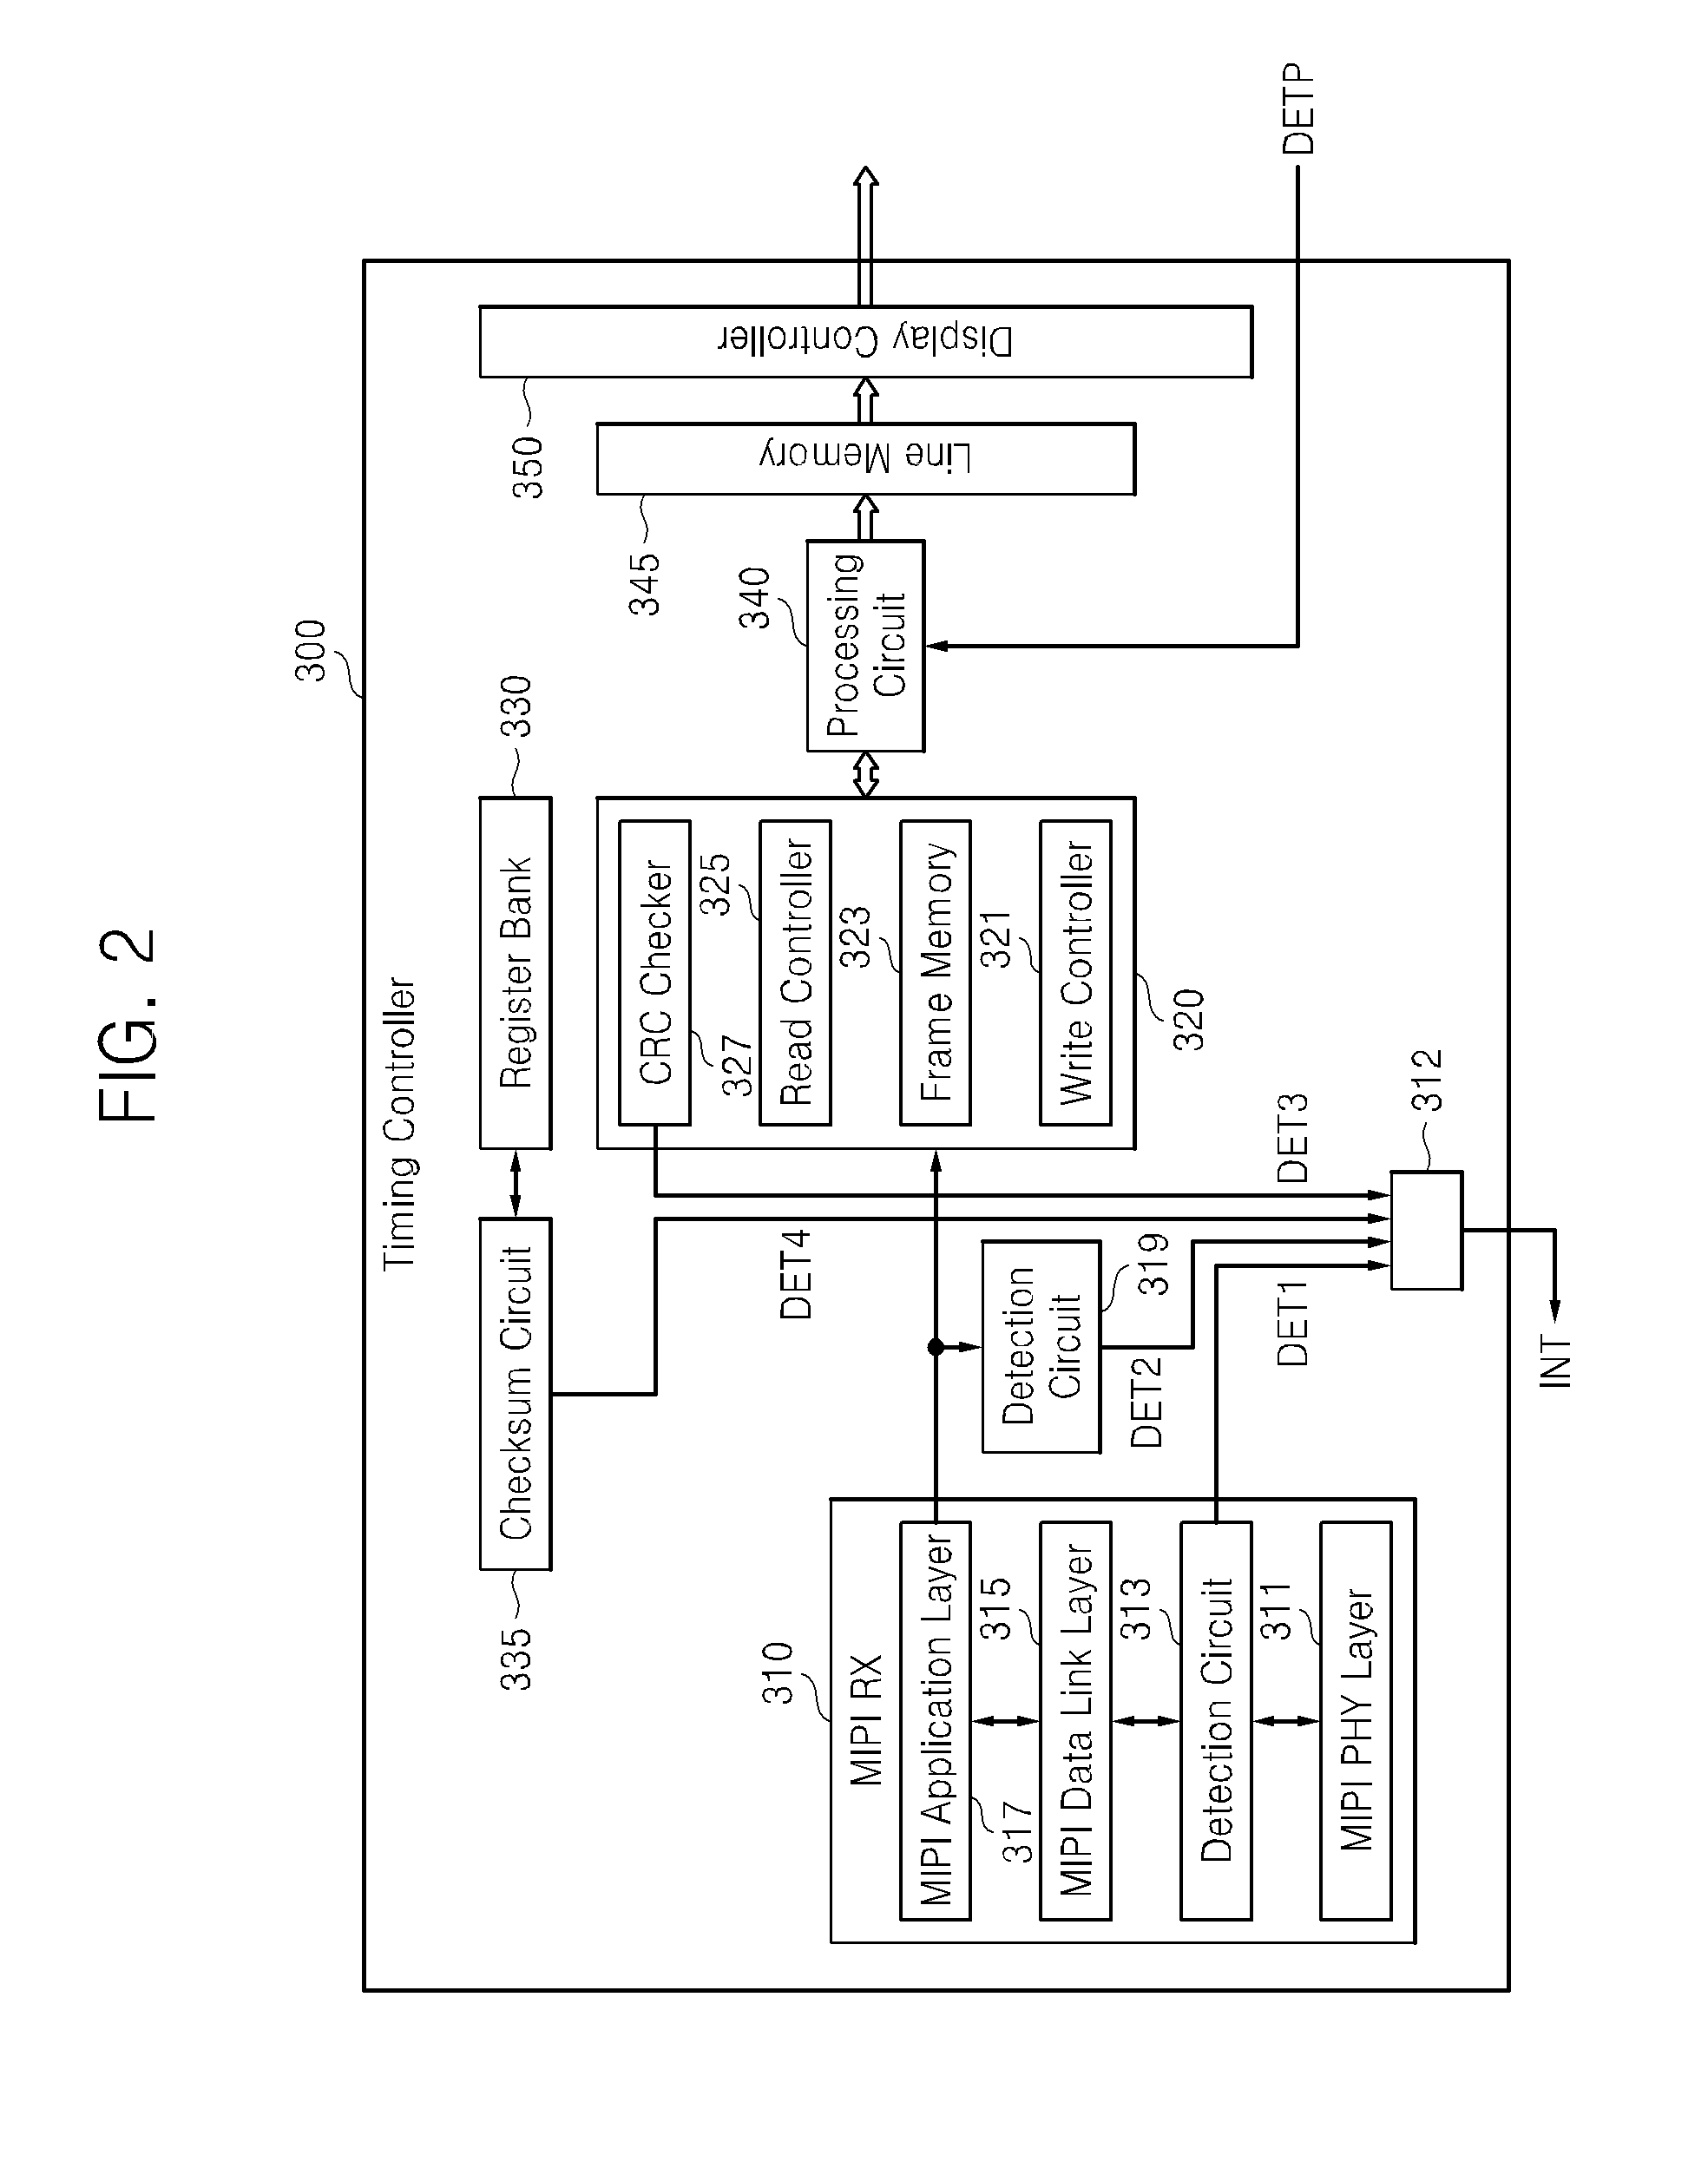 Timing controller, display system including the same, and method of use thereof